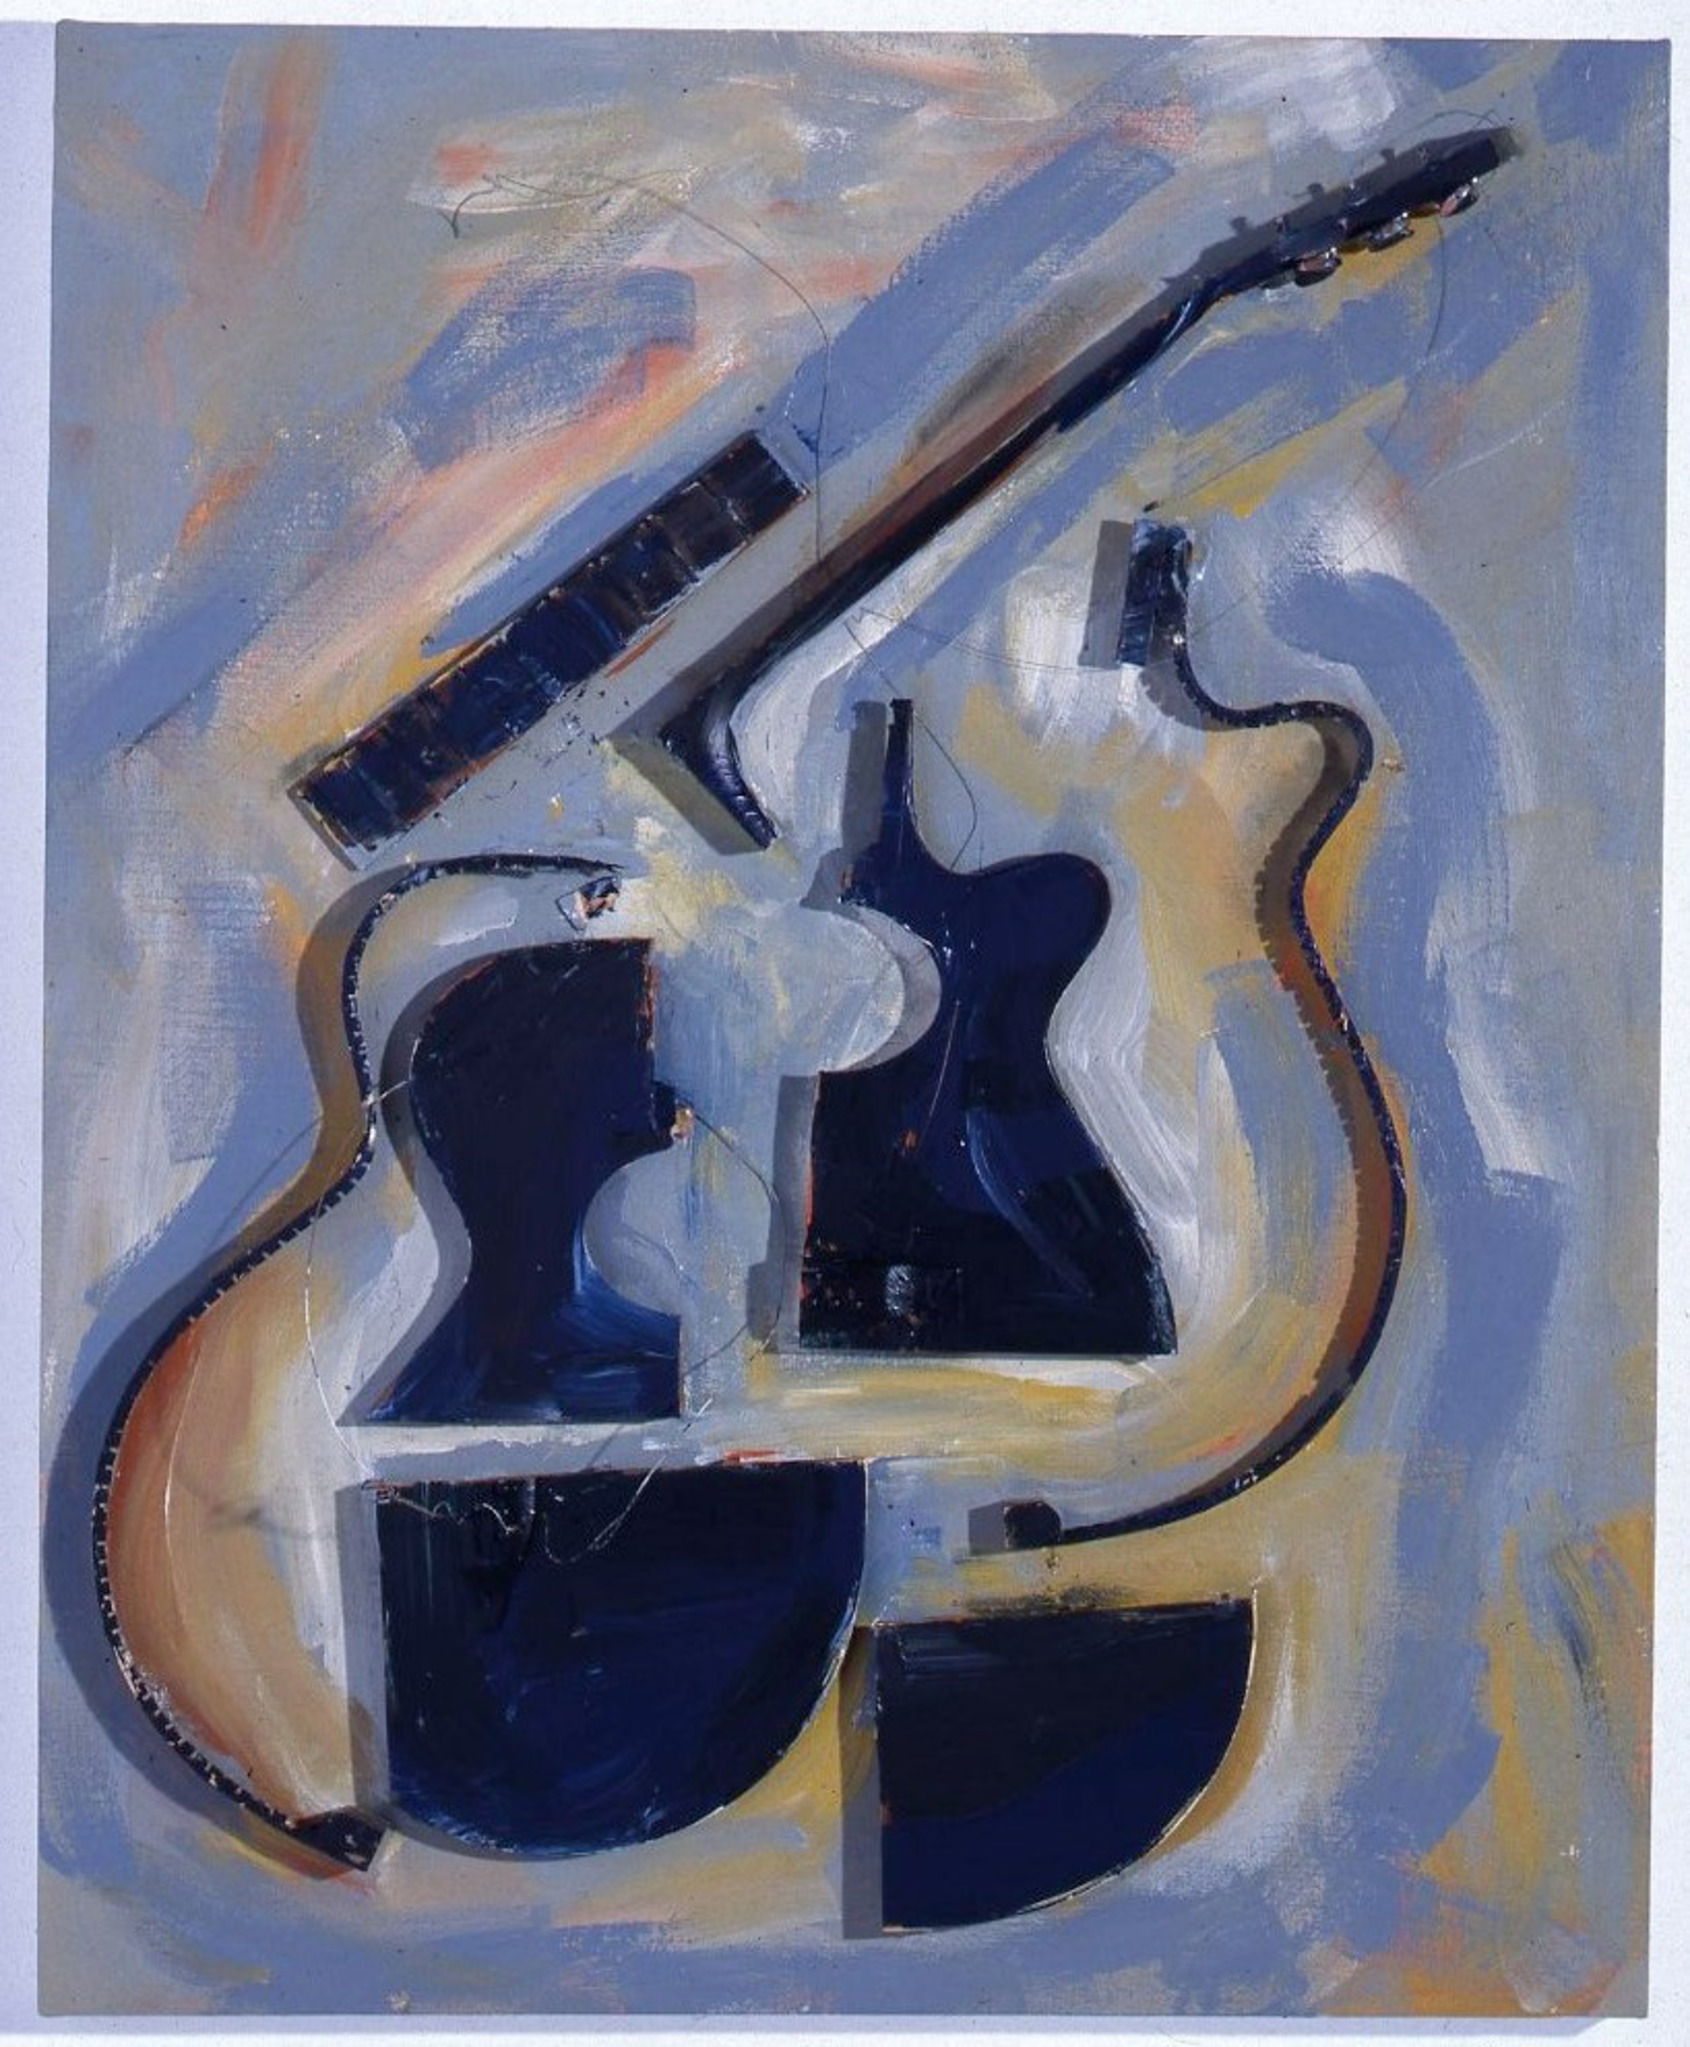  Untitled, Arman, 2002,100 x 81 x 10 cm. Sliced guitar with acrylic paint on canvas. Colors: steel blue, white, ochre rouge, ultramarine blue, raw sienna, gray. Courtesy of The Arman Marital Trust. 